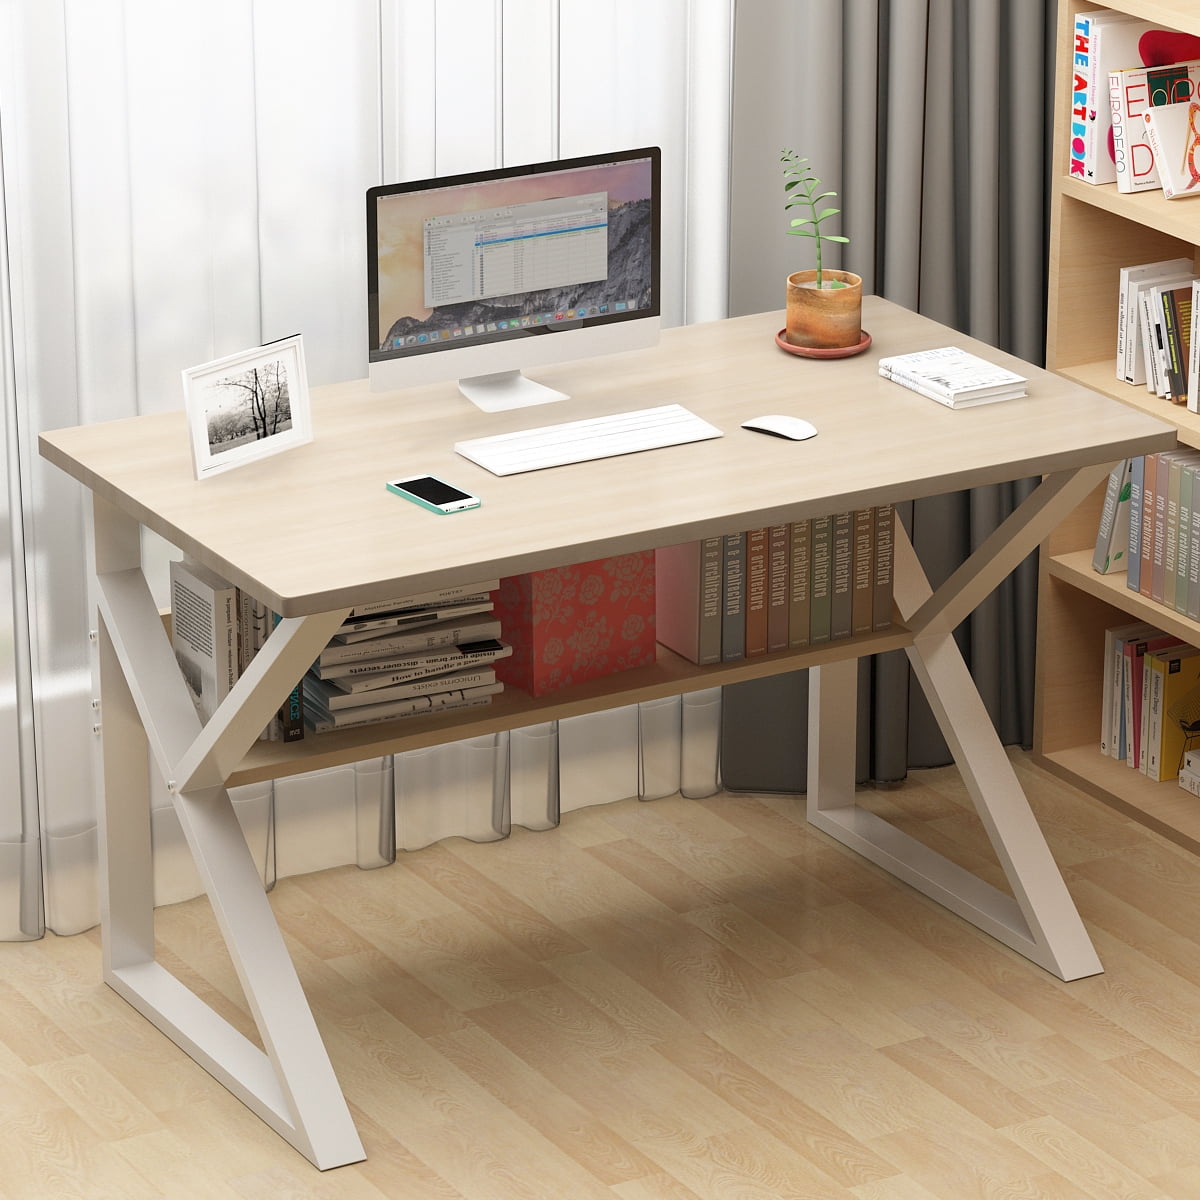 39.4” Children Desk Kids Study Desk Home Computer Table With Shelf Office table